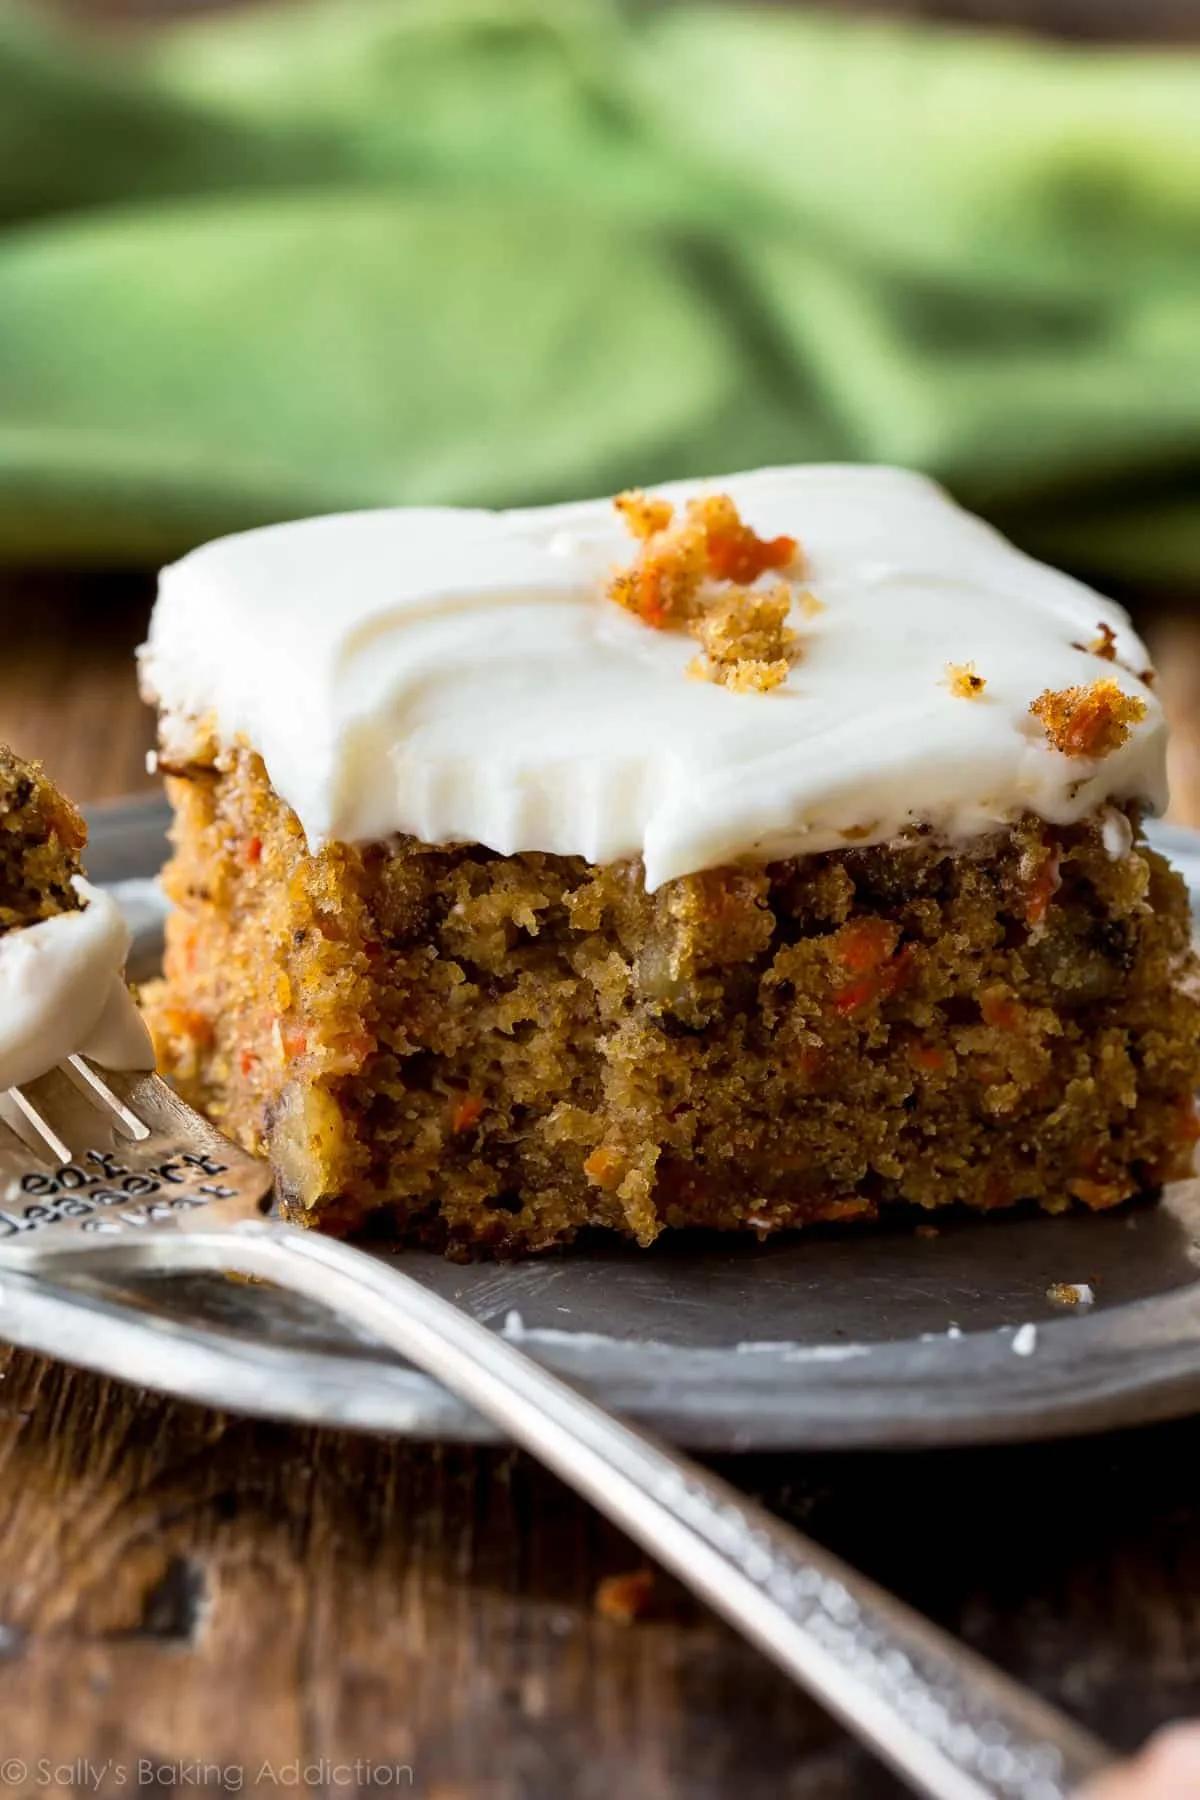 Pineapple Carrot Cake with Cream Cheese Frosting - Sallys Baking Addiction